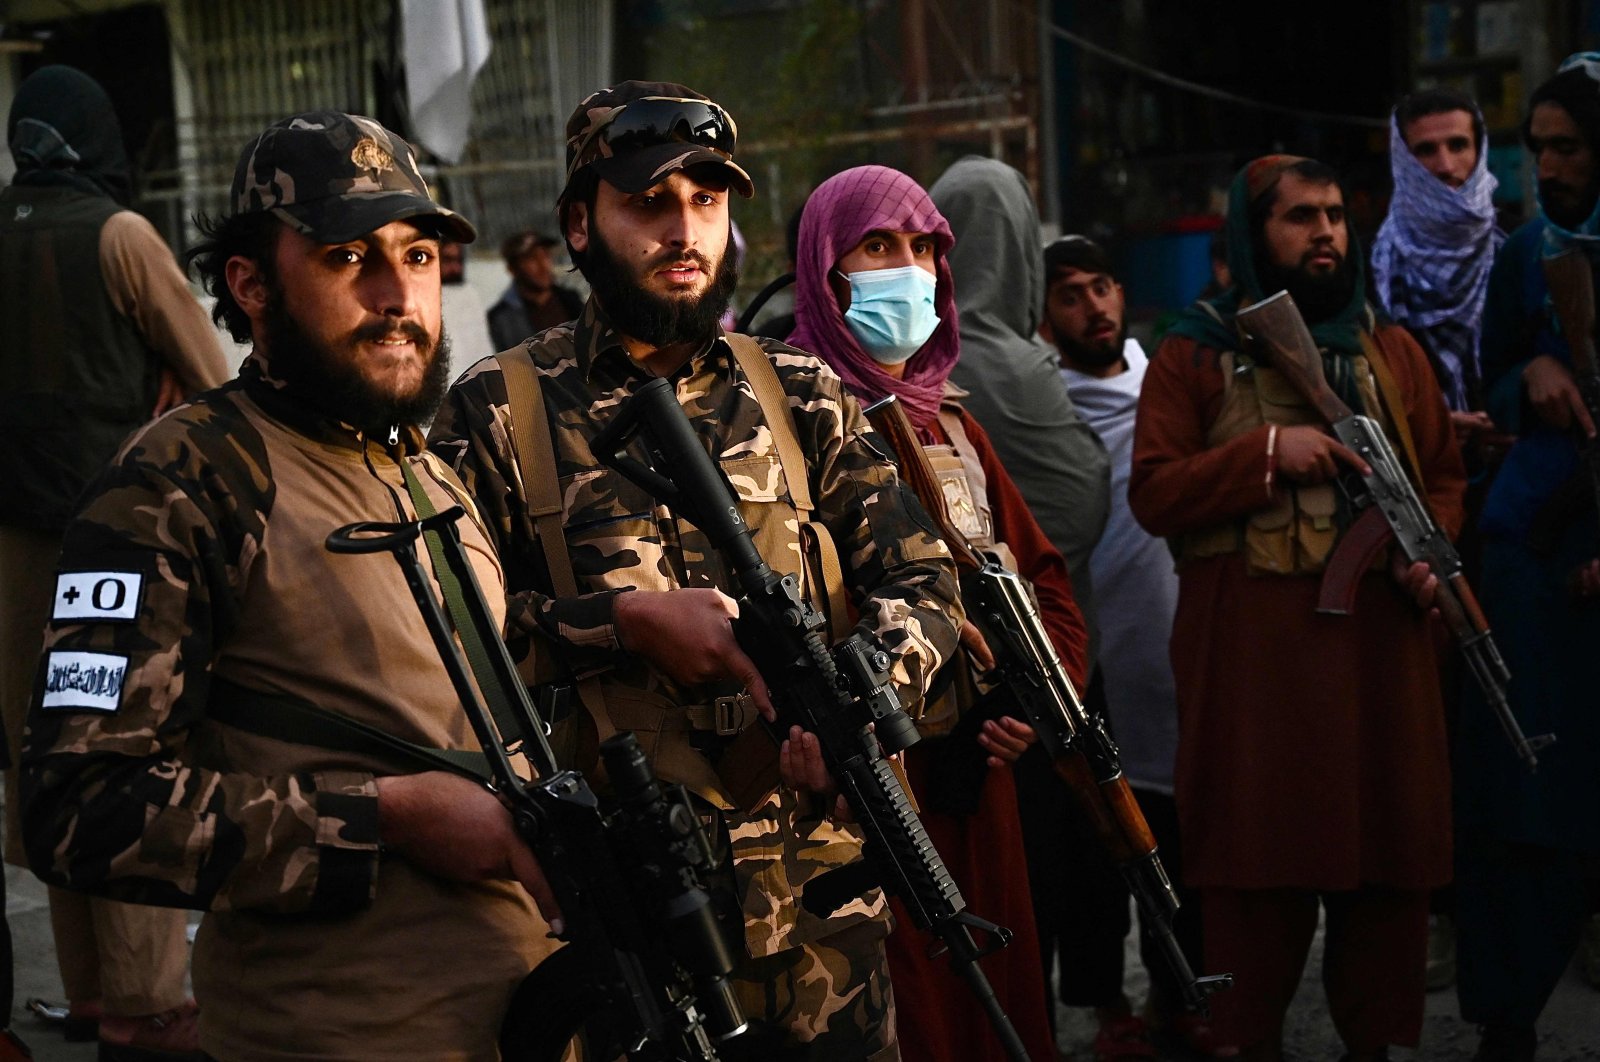 Taliban fighters stand guard near the military hospital in Kabul, Afghanistan